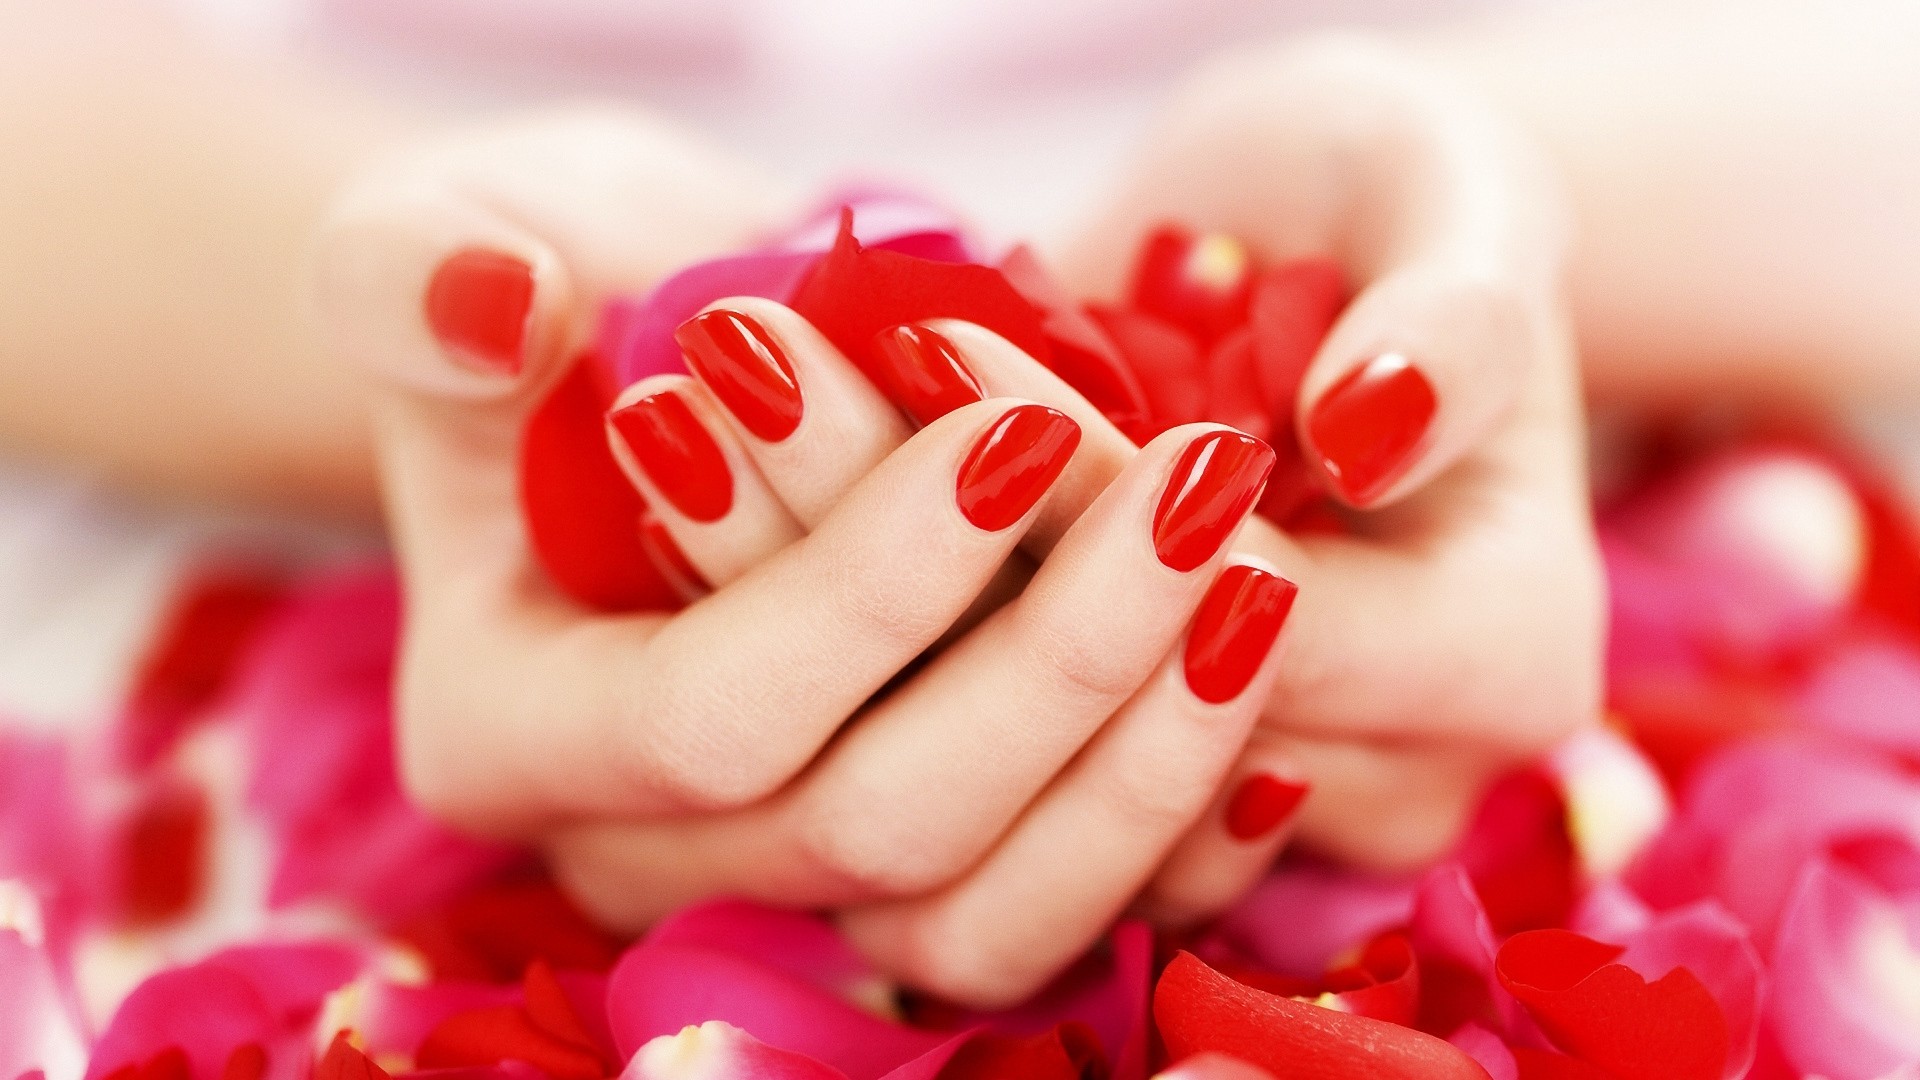 1920x1080 Manicure wallpaper | Manicure wallpapers HD | Pinterest | Manicure and  Wallpaper